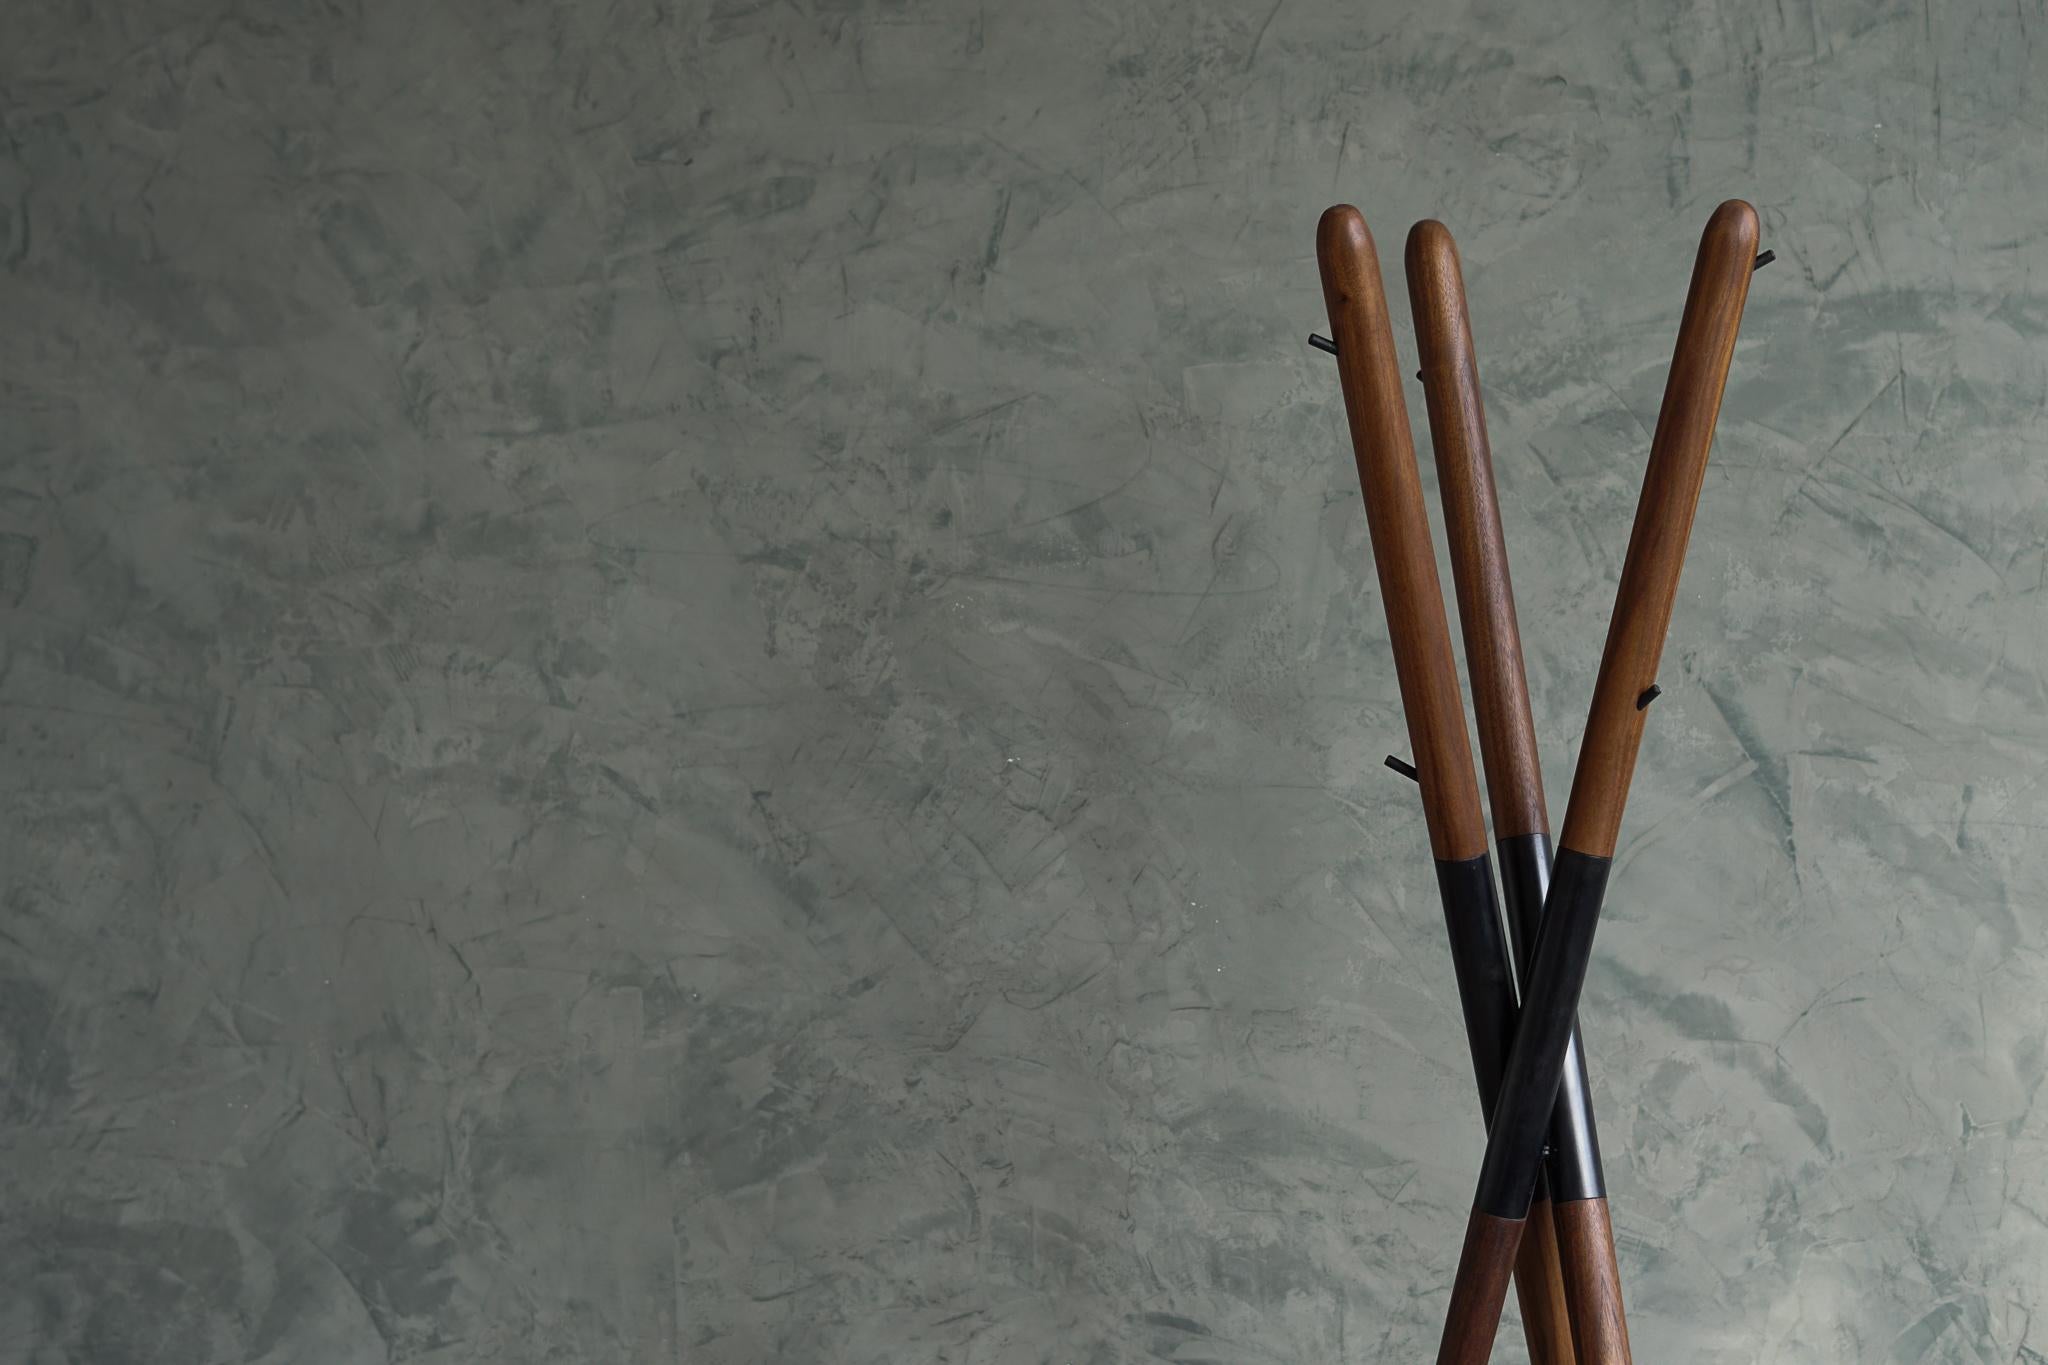 The Hashi coat rack is designed after a widely known tool, the chopsticks. Created from walnut and blackened steel. The Hashi mimics the simplicity and timelessness of this ancient tool used daily by millions around the globe.